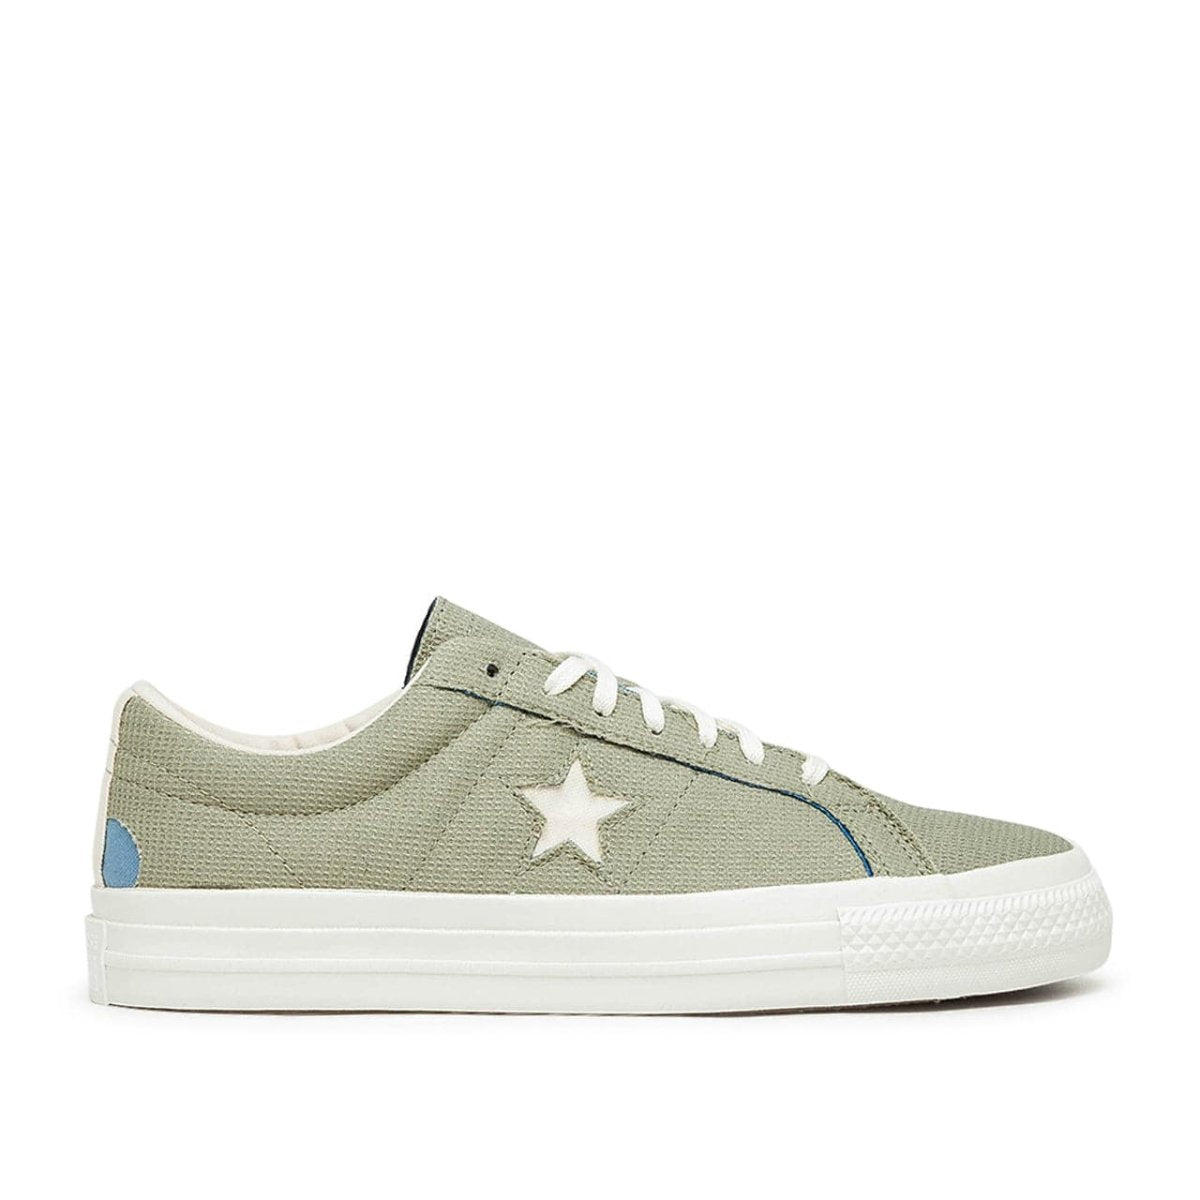 Converse One Star TRI Panel Reveal 172934C-494